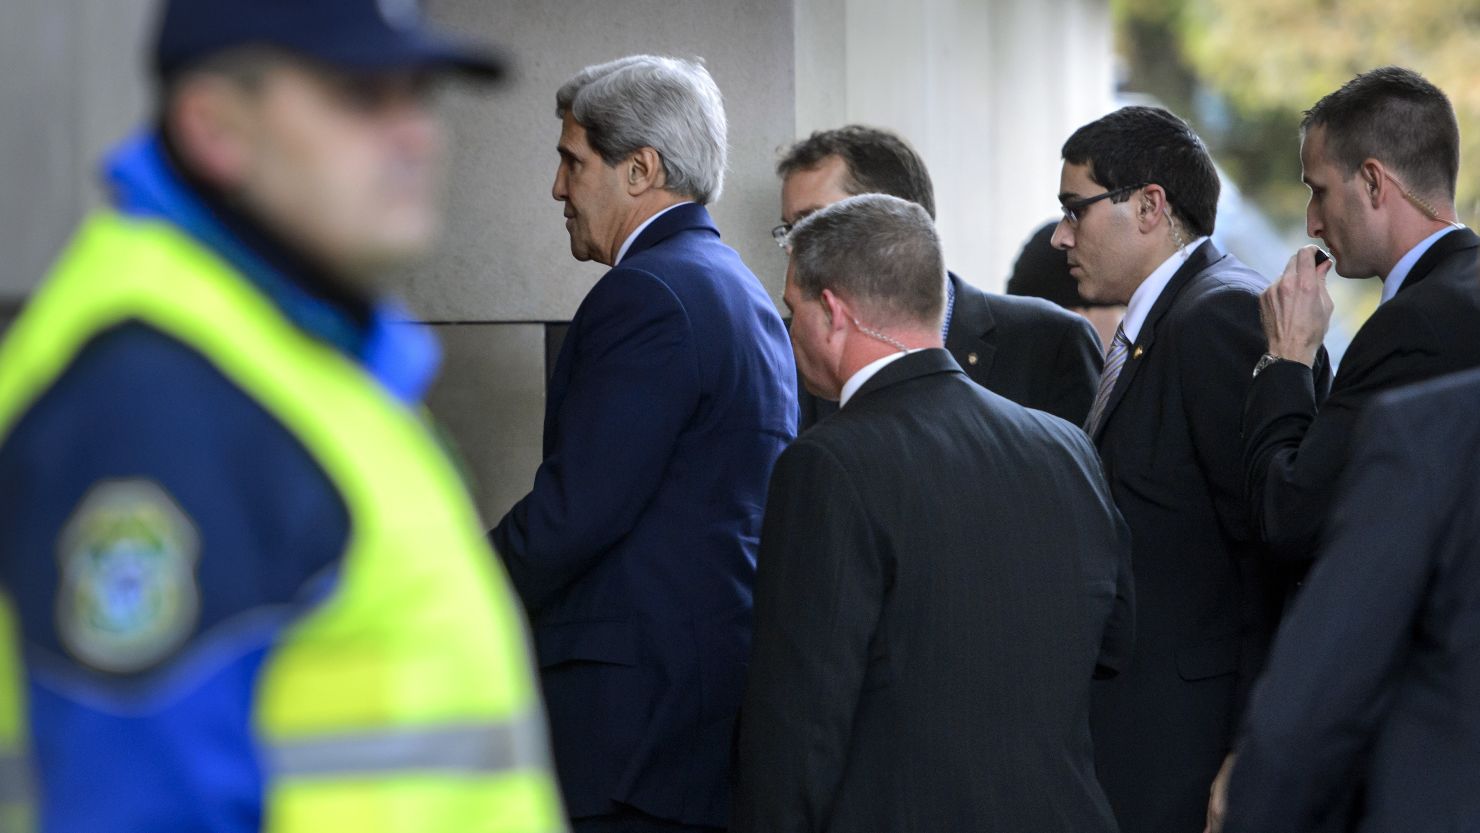 Secretary of State John Kerry, followed by bodyguards, enters the Intercontinental Hotel in Geneva for Iran talks on Saturday.